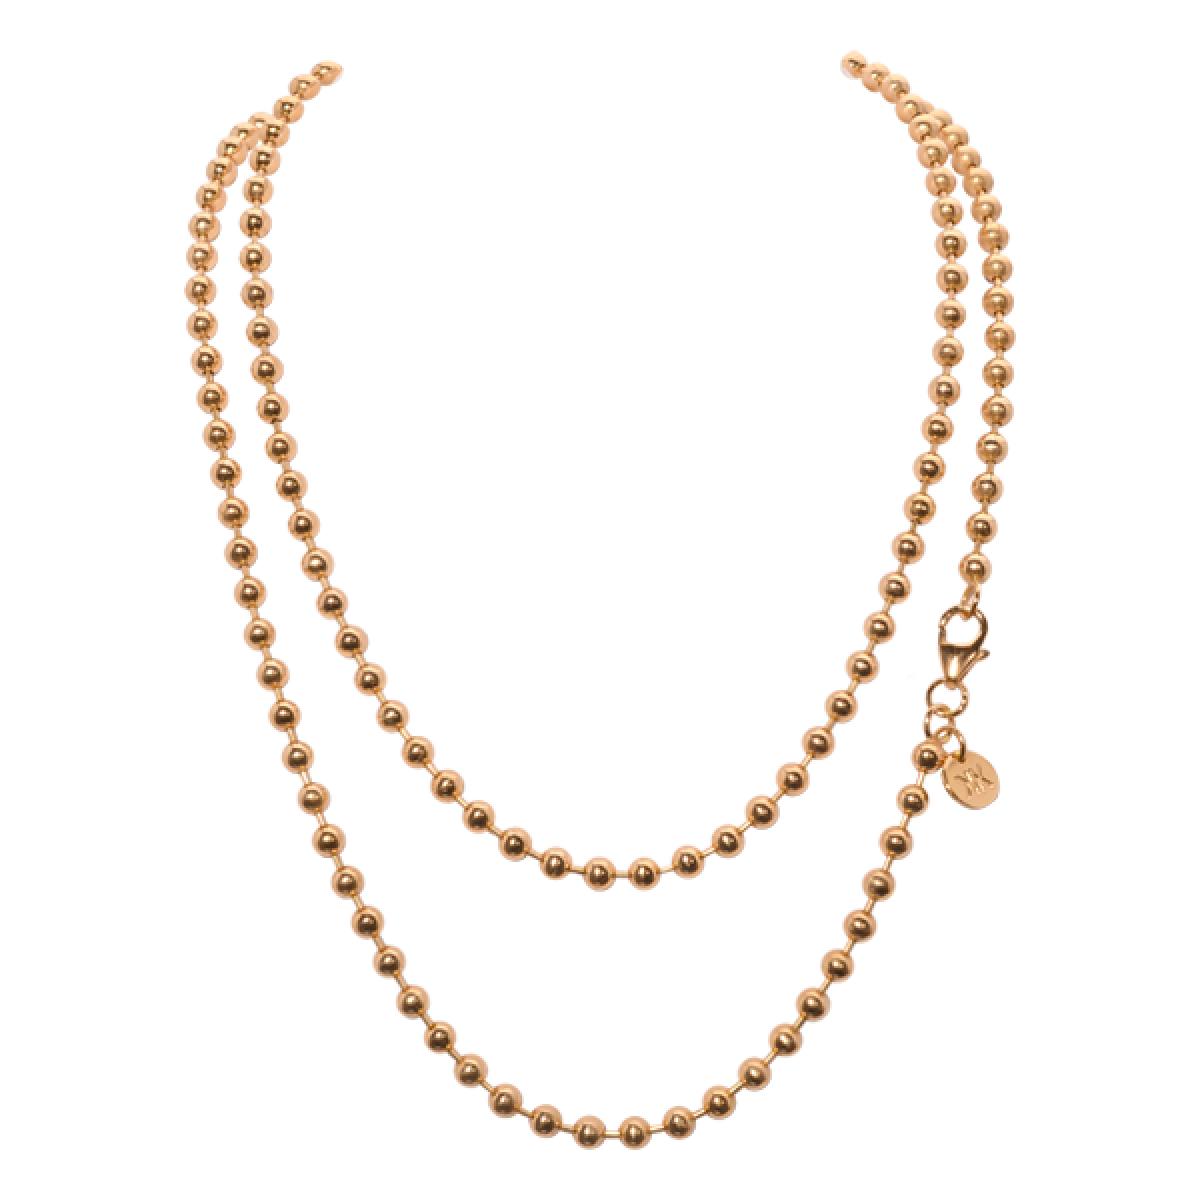 Chain transparent png pictures. Pearl clipart gold bead